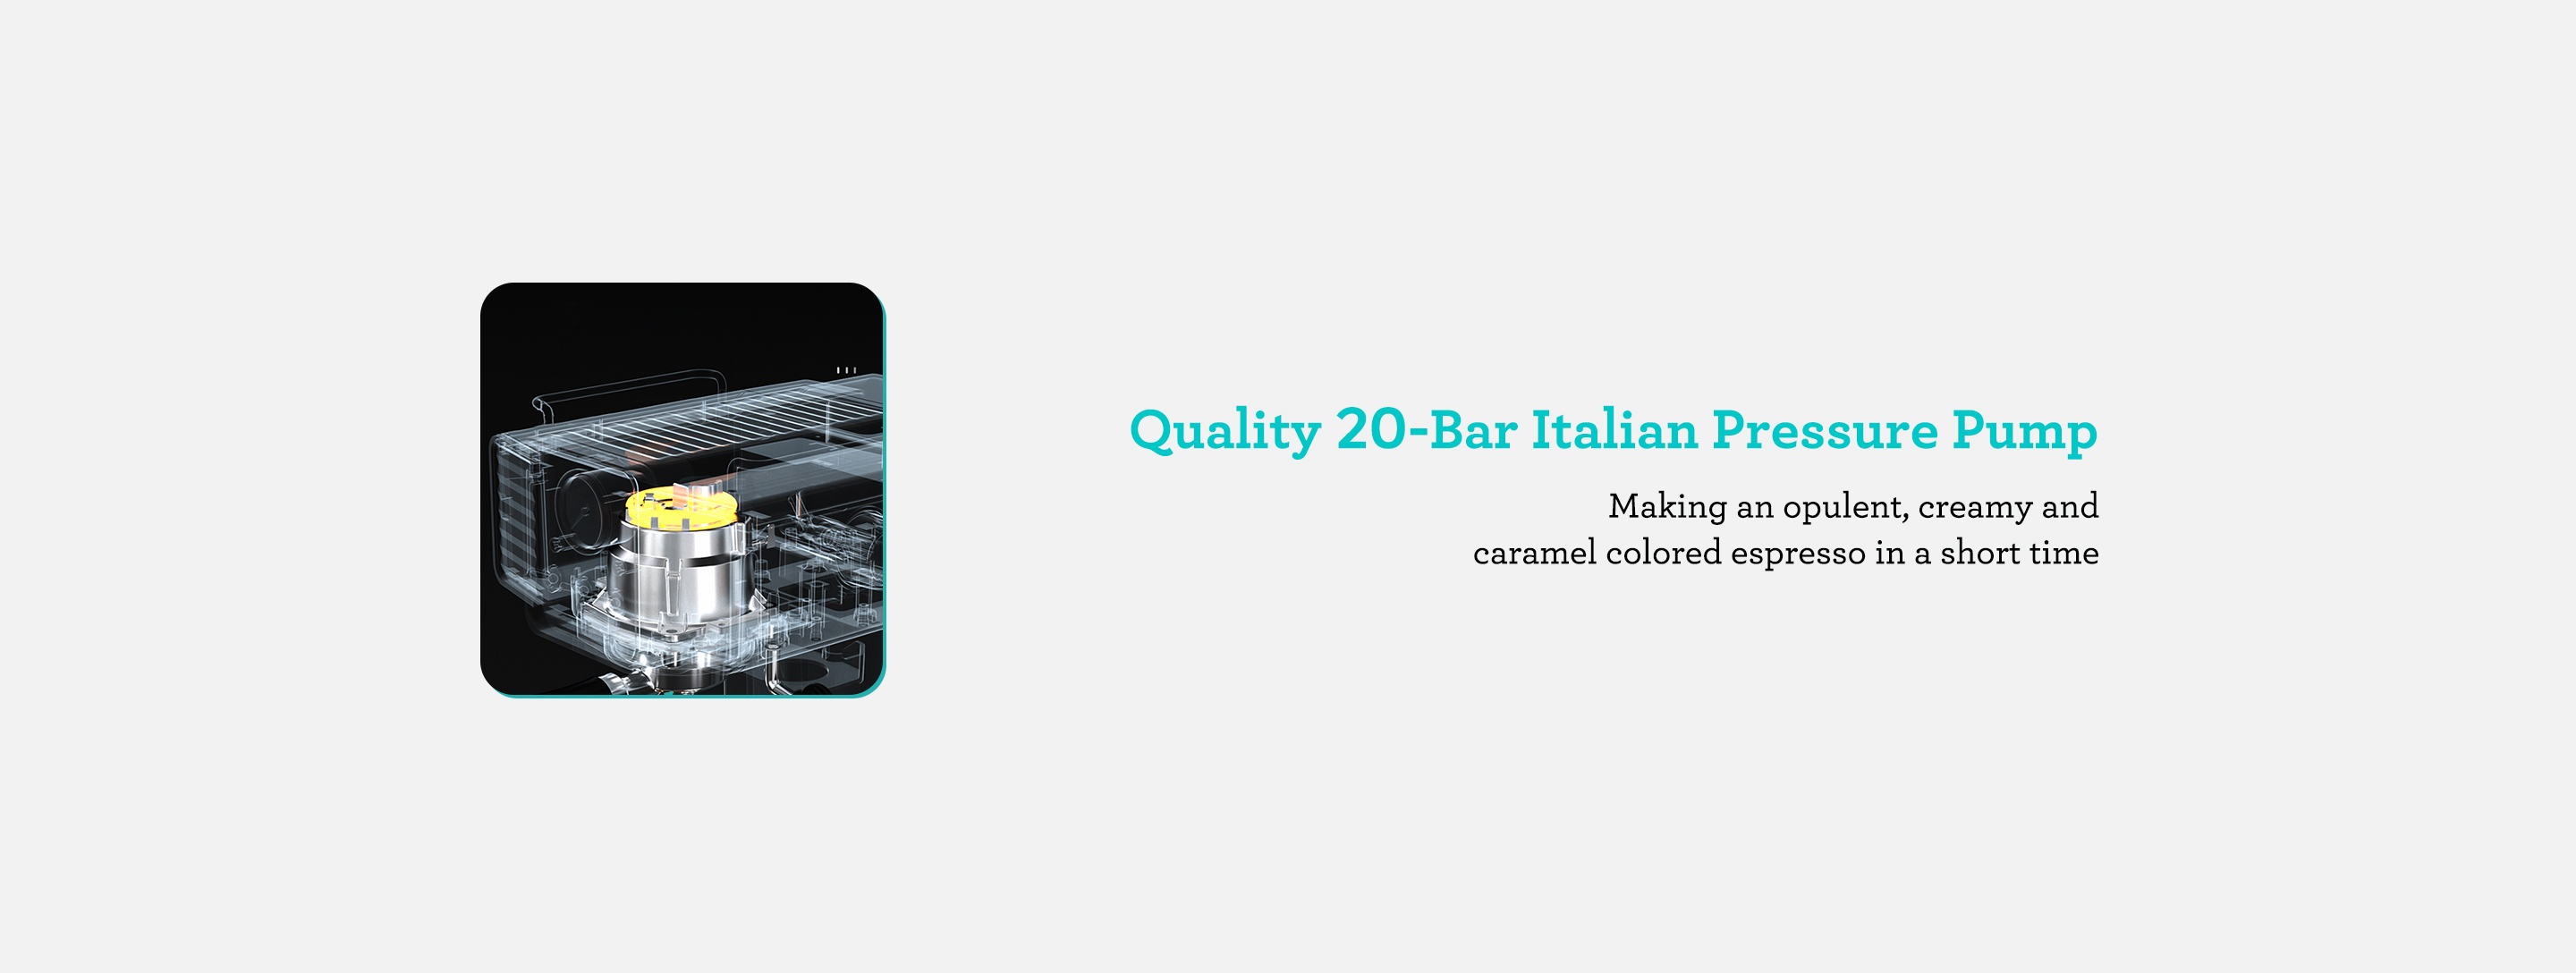 Quality Italian Pressure pUmp Extracting coffee professionally with richer and smoother taste 20 bar high-pressure system helps to extract quickly